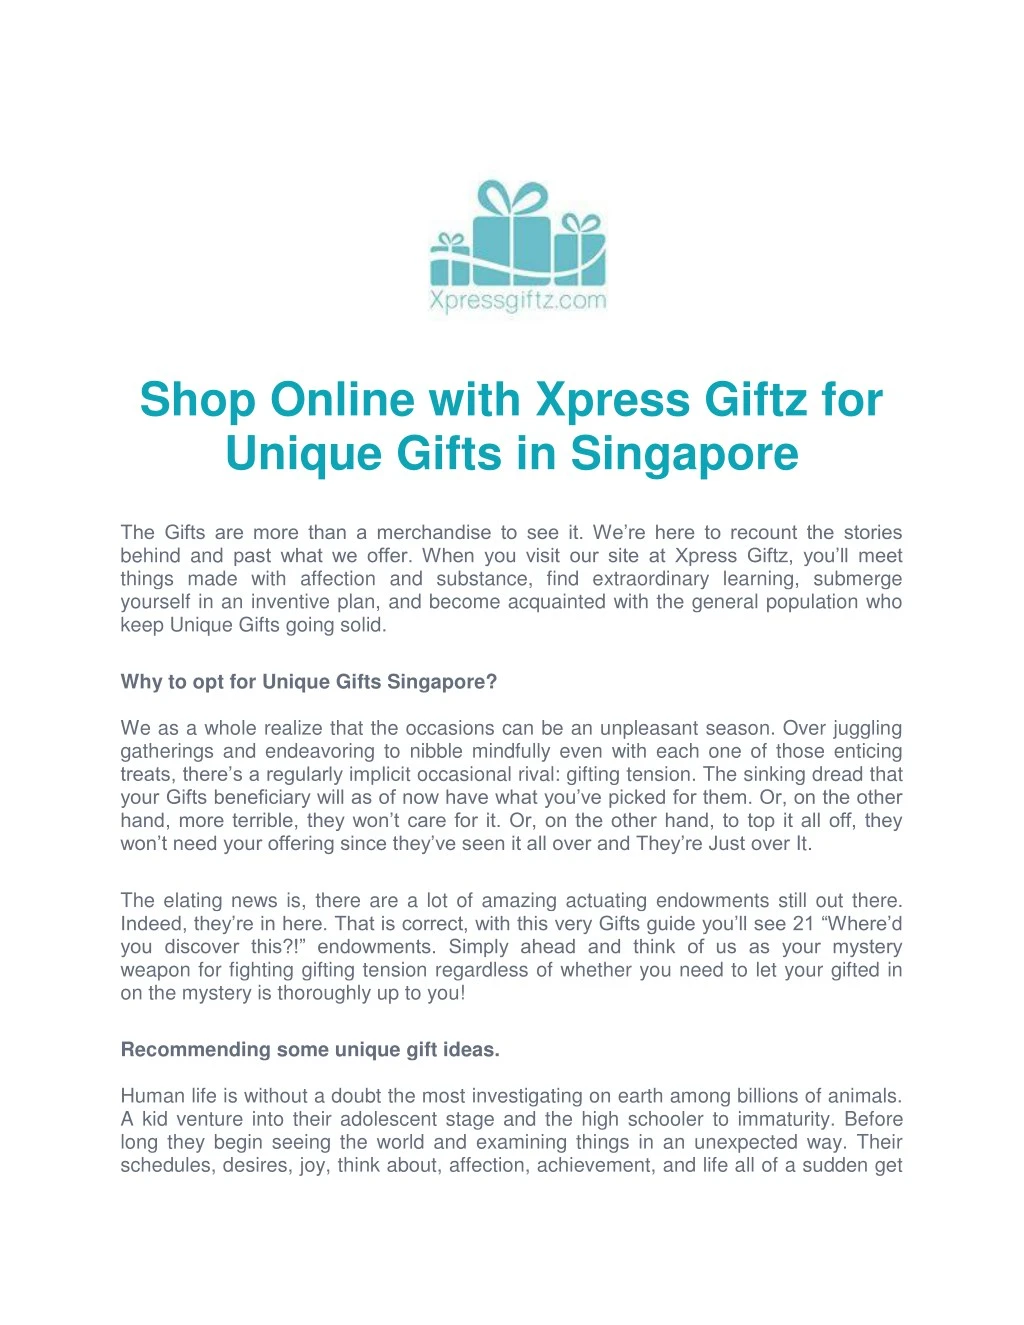 shop online with xpress giftz for unique gifts